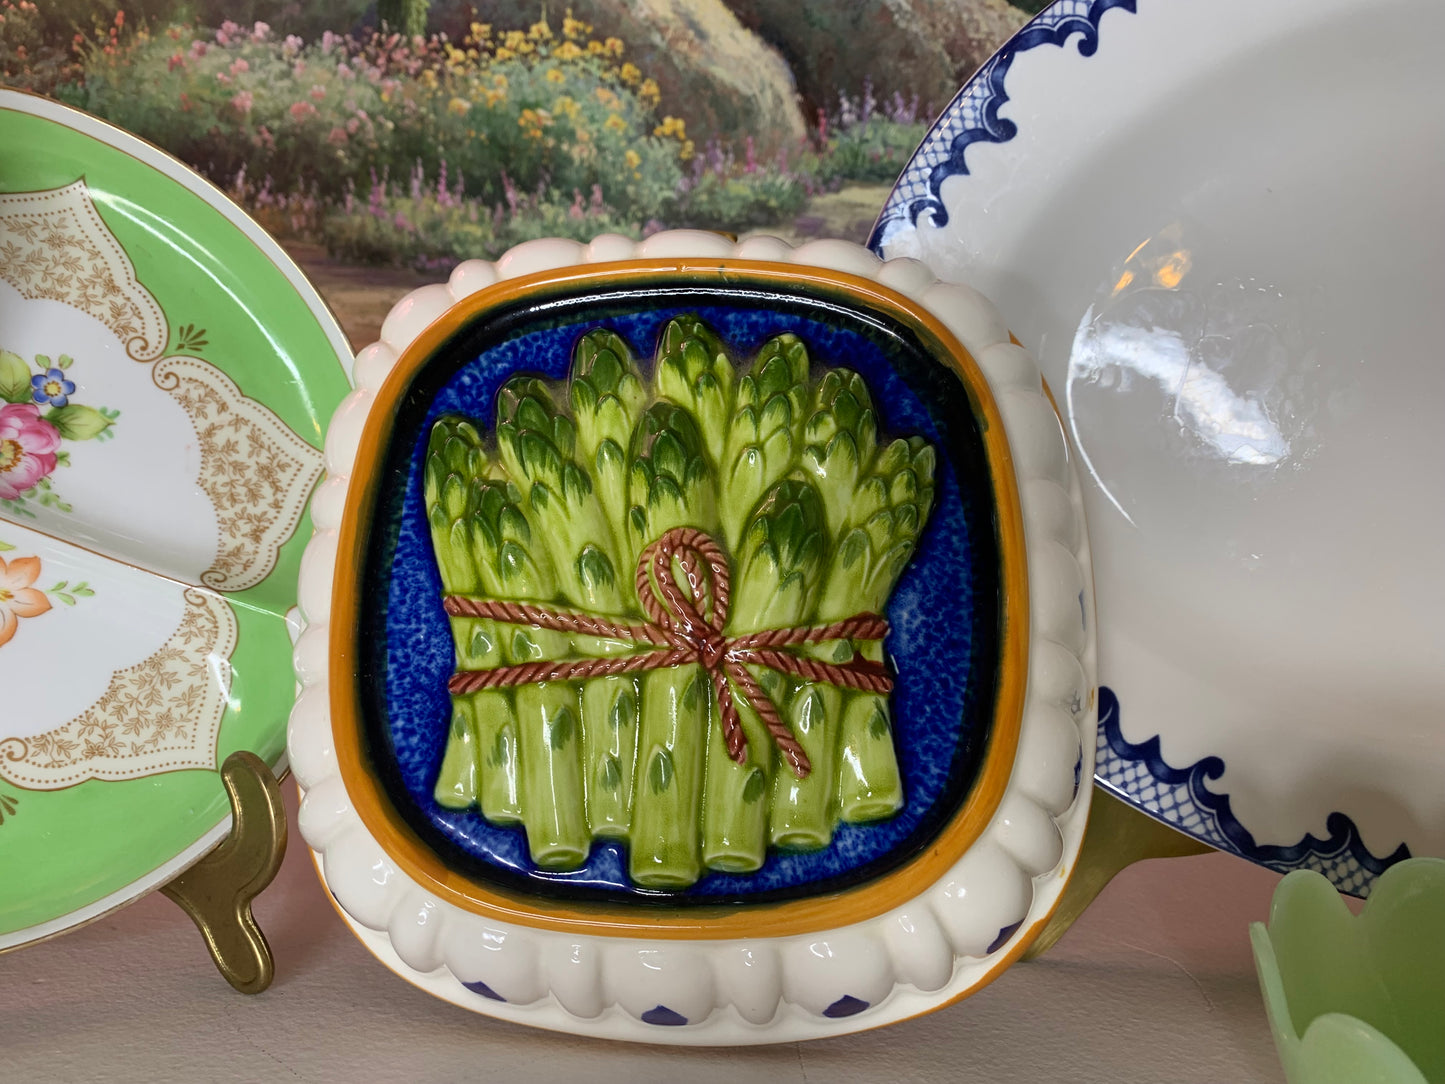 Beautiful Asparagus Ceramic Mold with vivid blues and greens! Excellent condition!